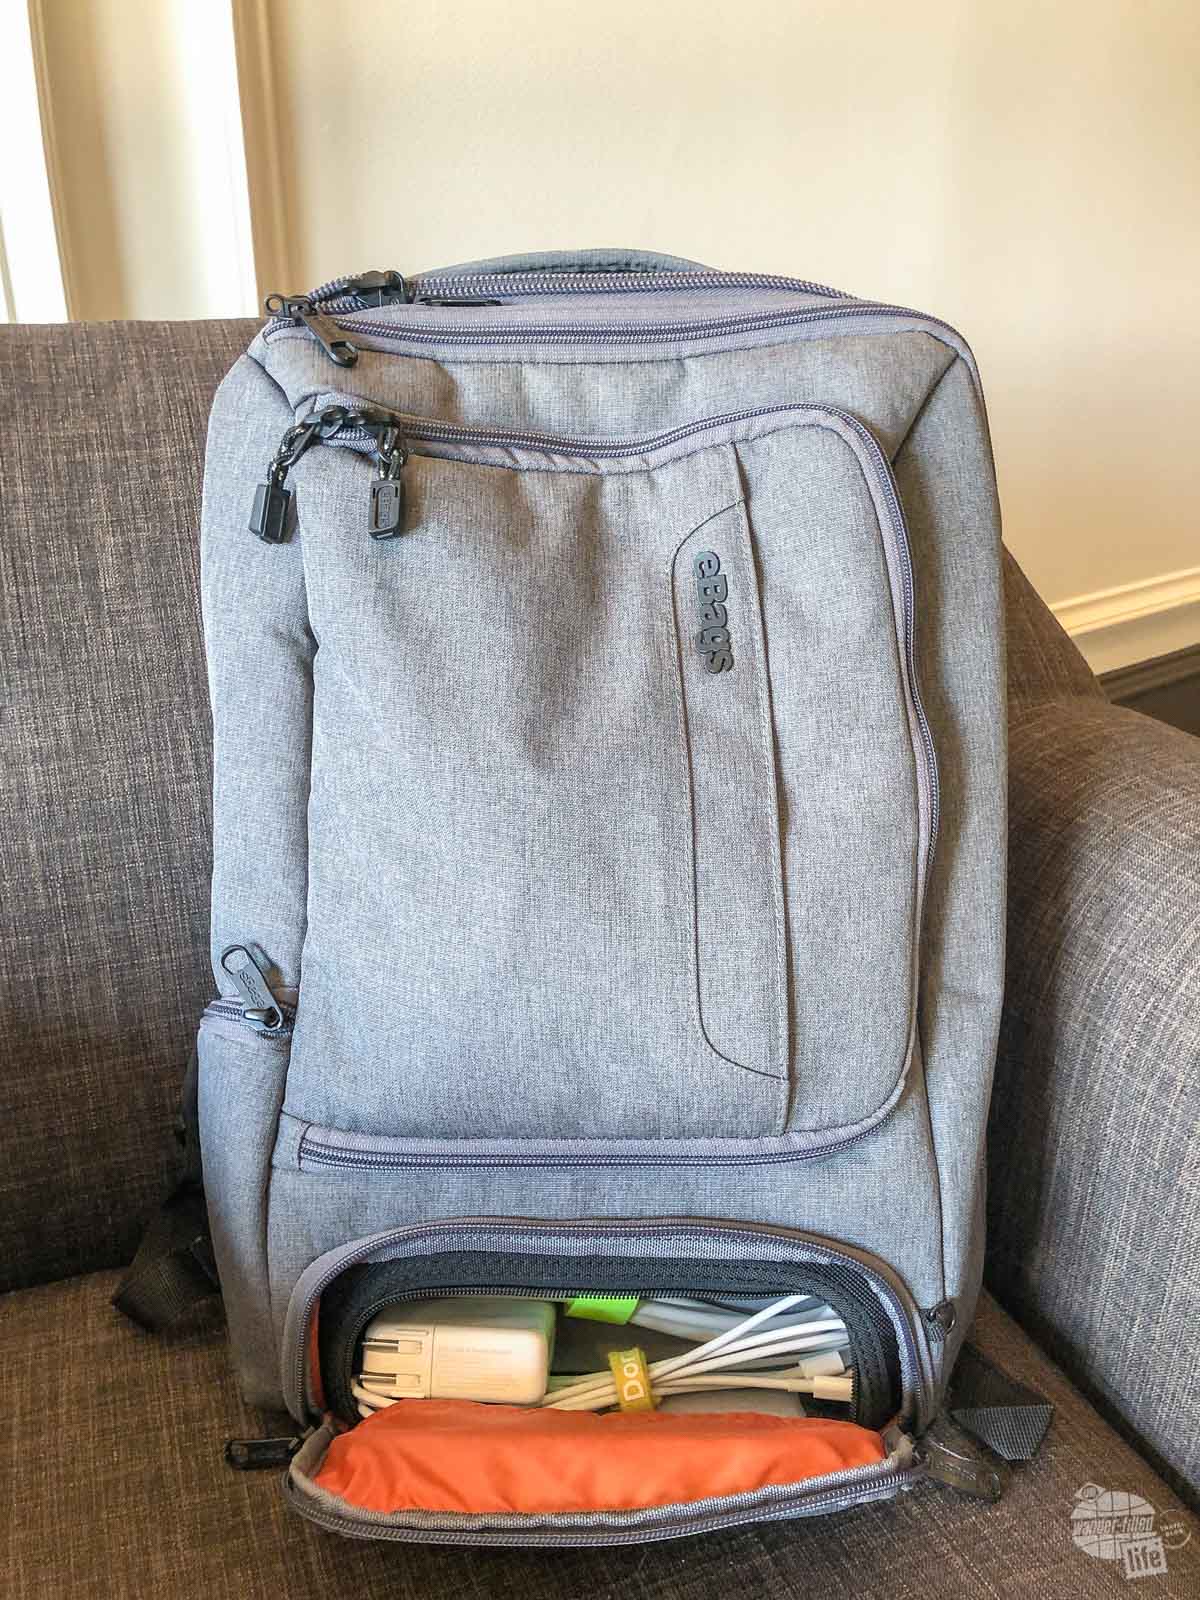 The bottom compartment on the eBags Profession Slim Laptop Backpack is perfect for chargers and accessories.